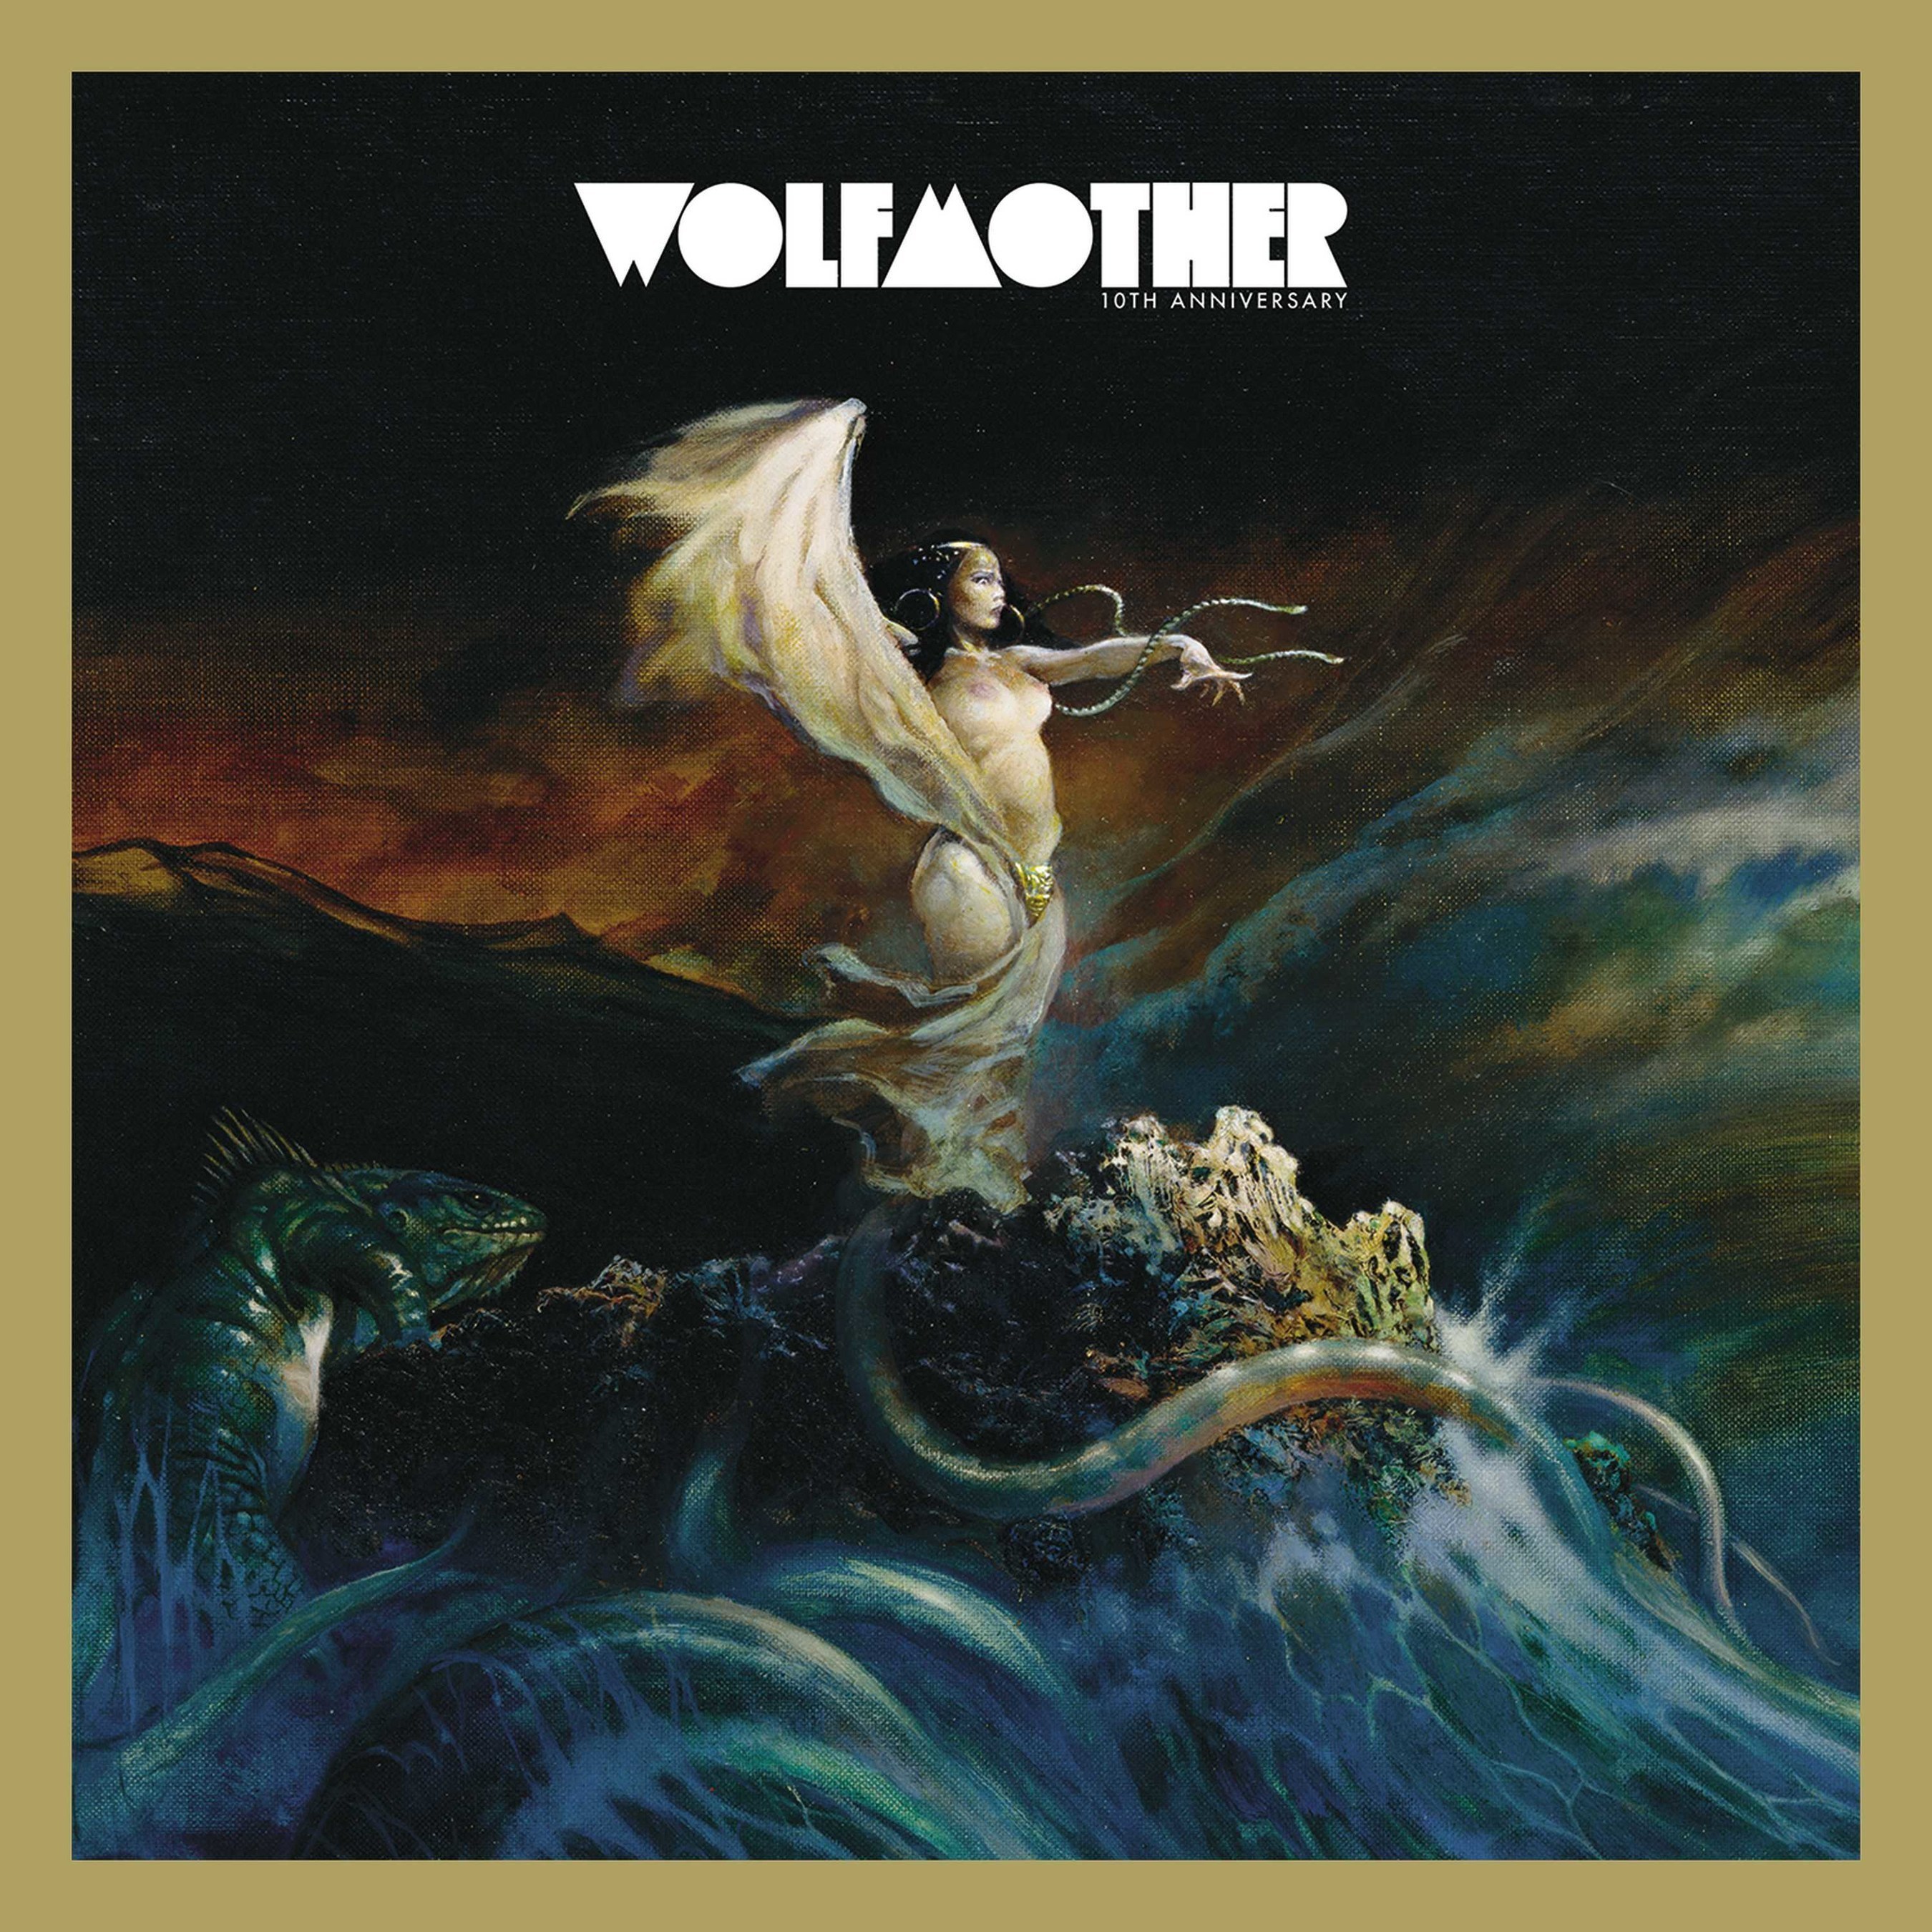 Wolfmother Deluxe Two-CD and Two-LP Vinyl Versions Mark 10th Anniversary Of Band's Debut Album, Slated for Release by Interscope/Universal Music Enterprises September 25